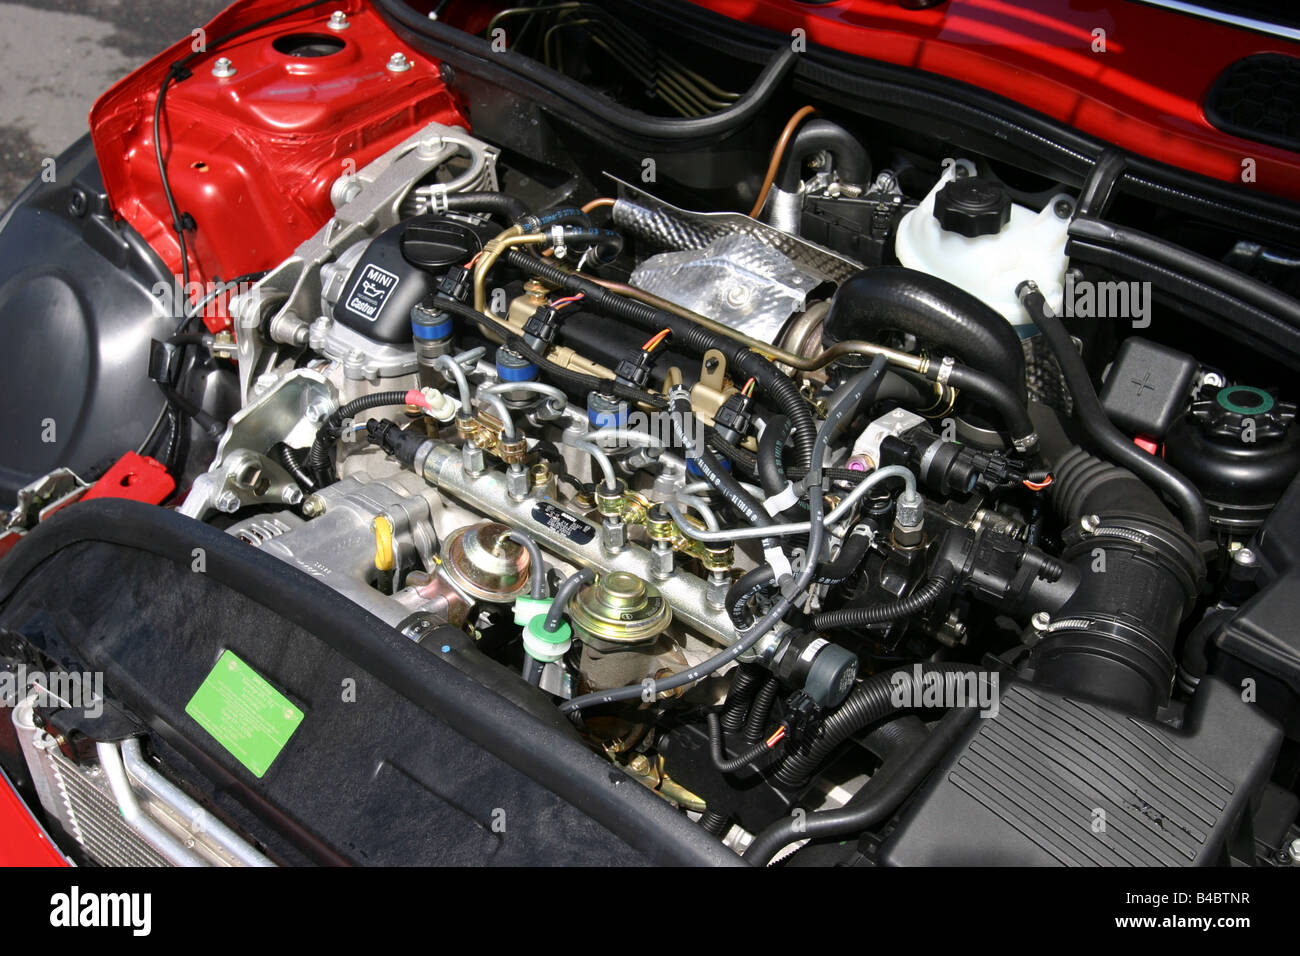 Car engine in red car stock photo. Image of motor, engine - 21214300